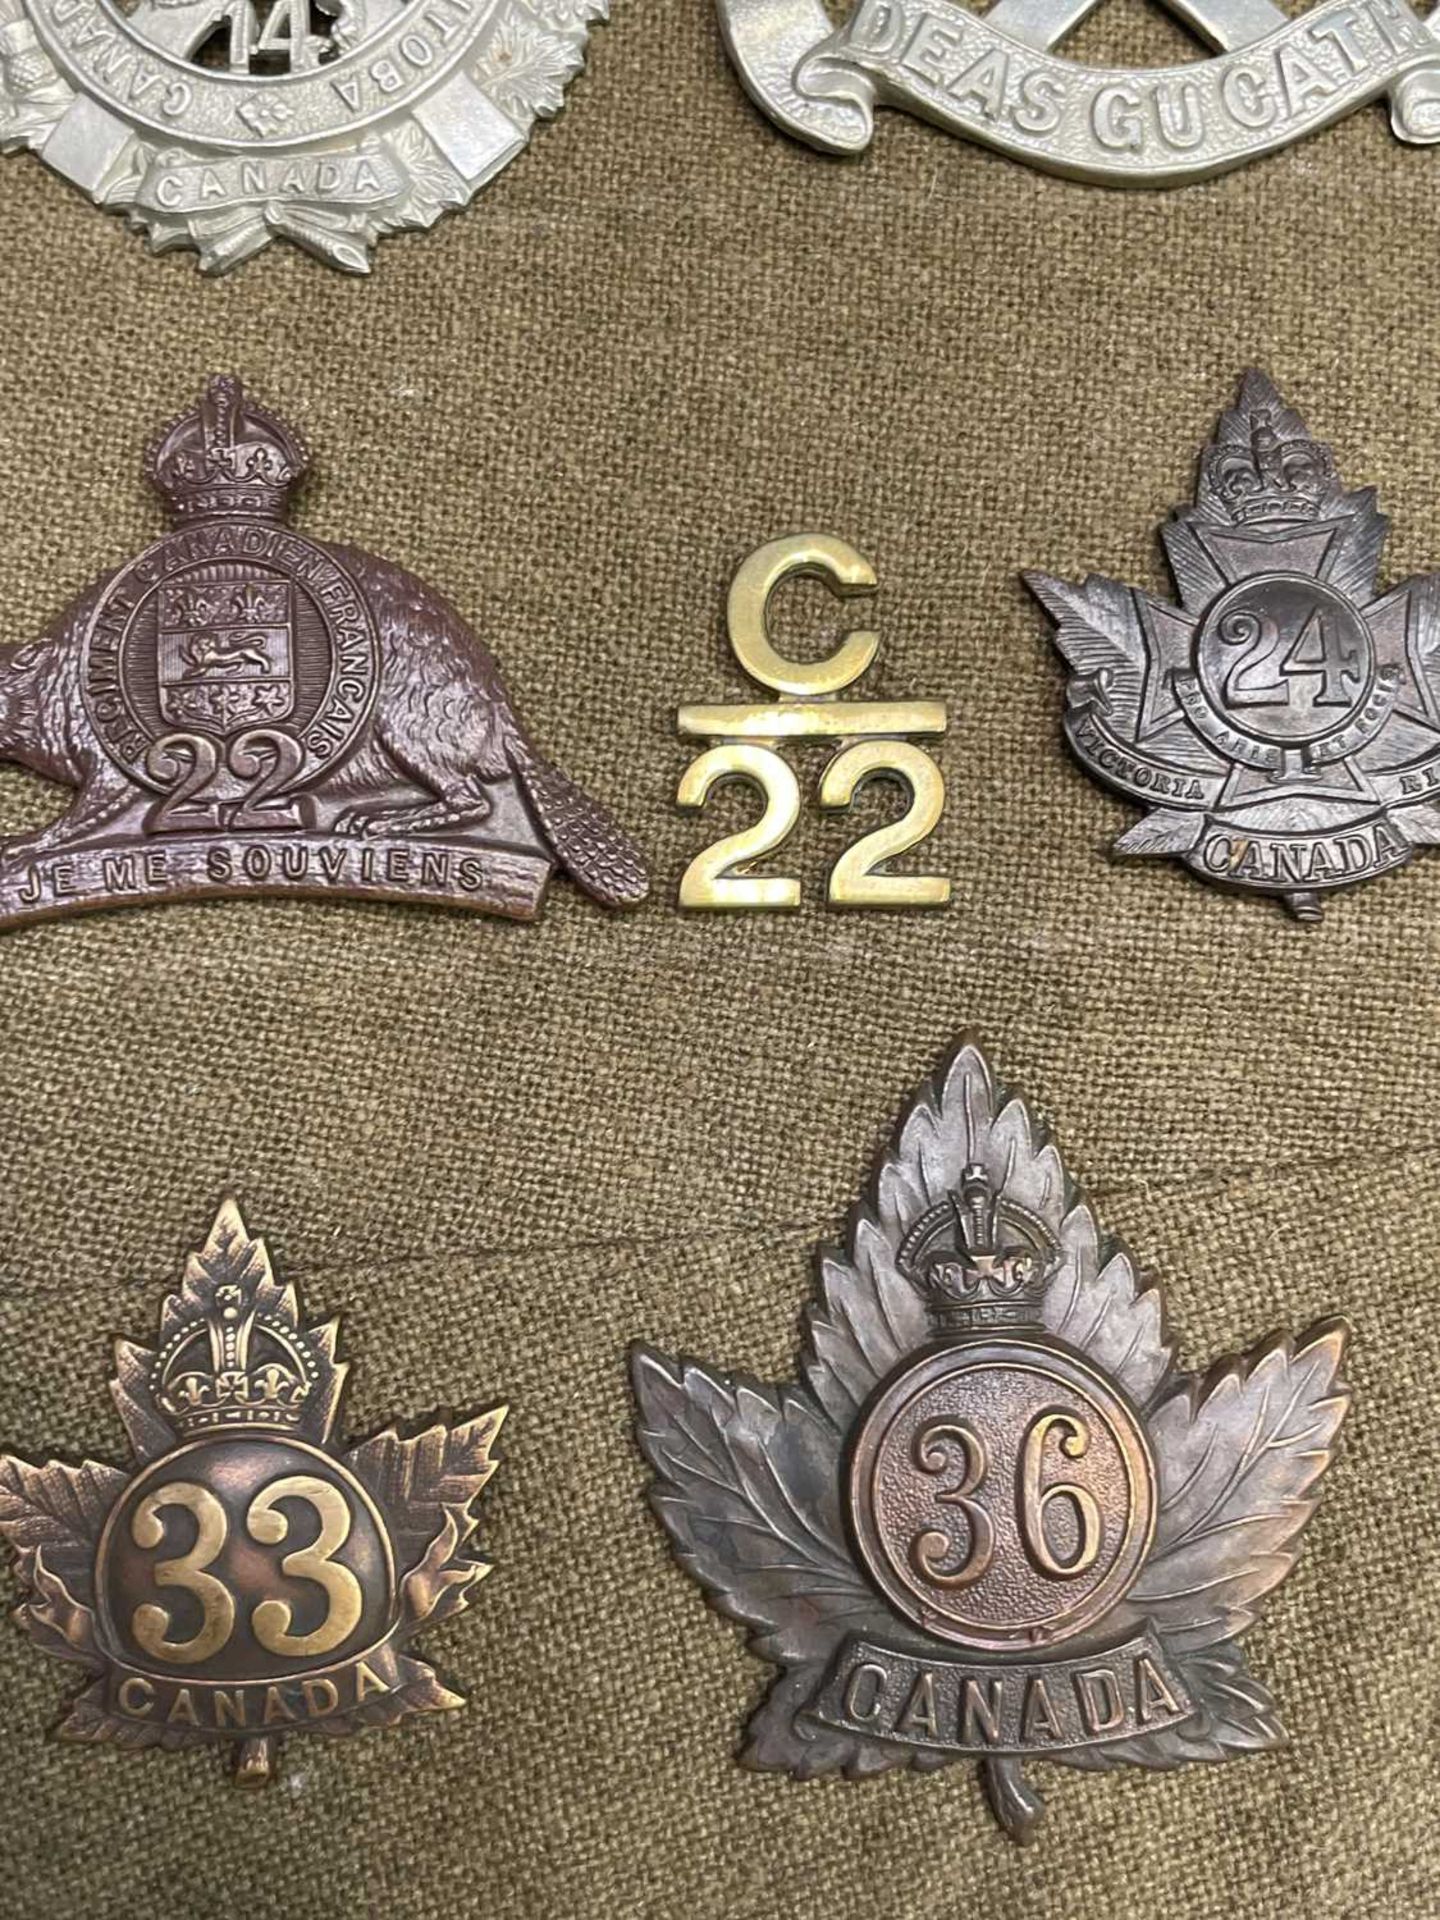 Canadian Expeditionary Forces 1 to 39 Battalions. A display card containing cap badges, collar dogs, - Image 2 of 5